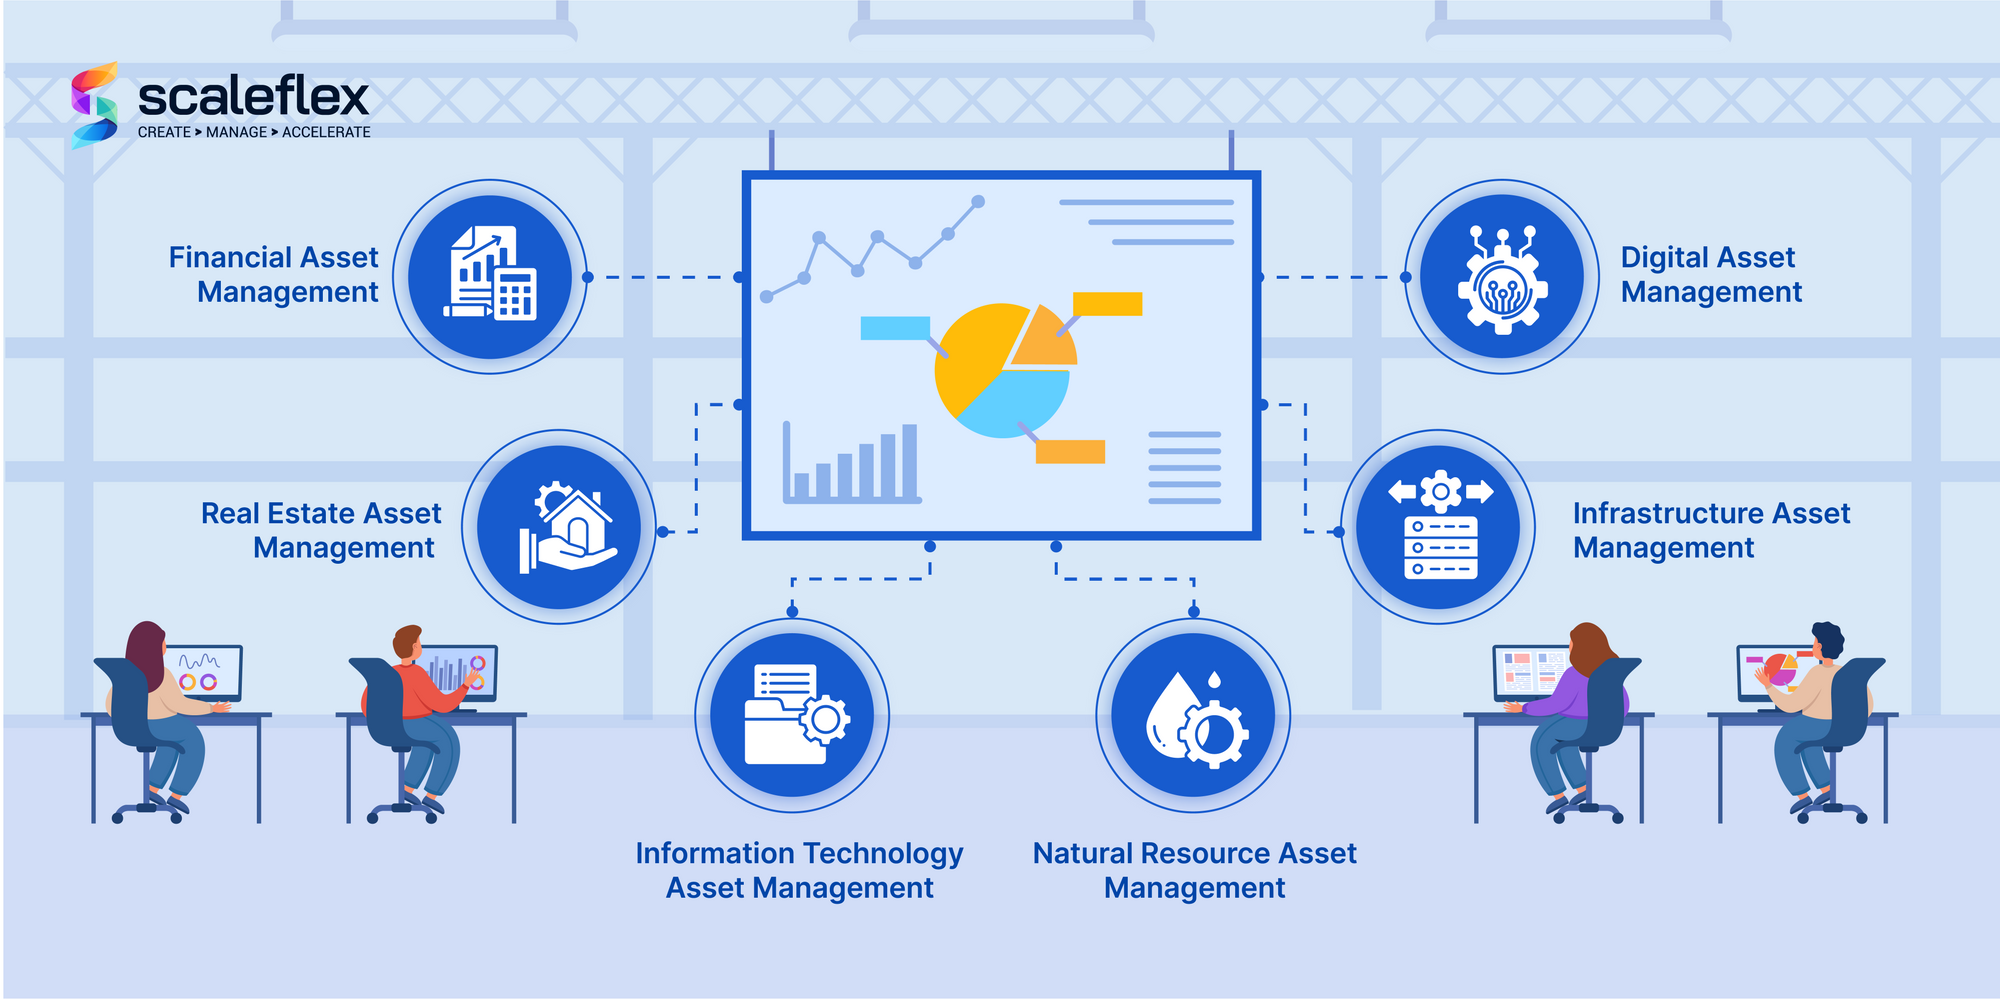 A board leads us to explore the 6 main types of asset management typically encountered.